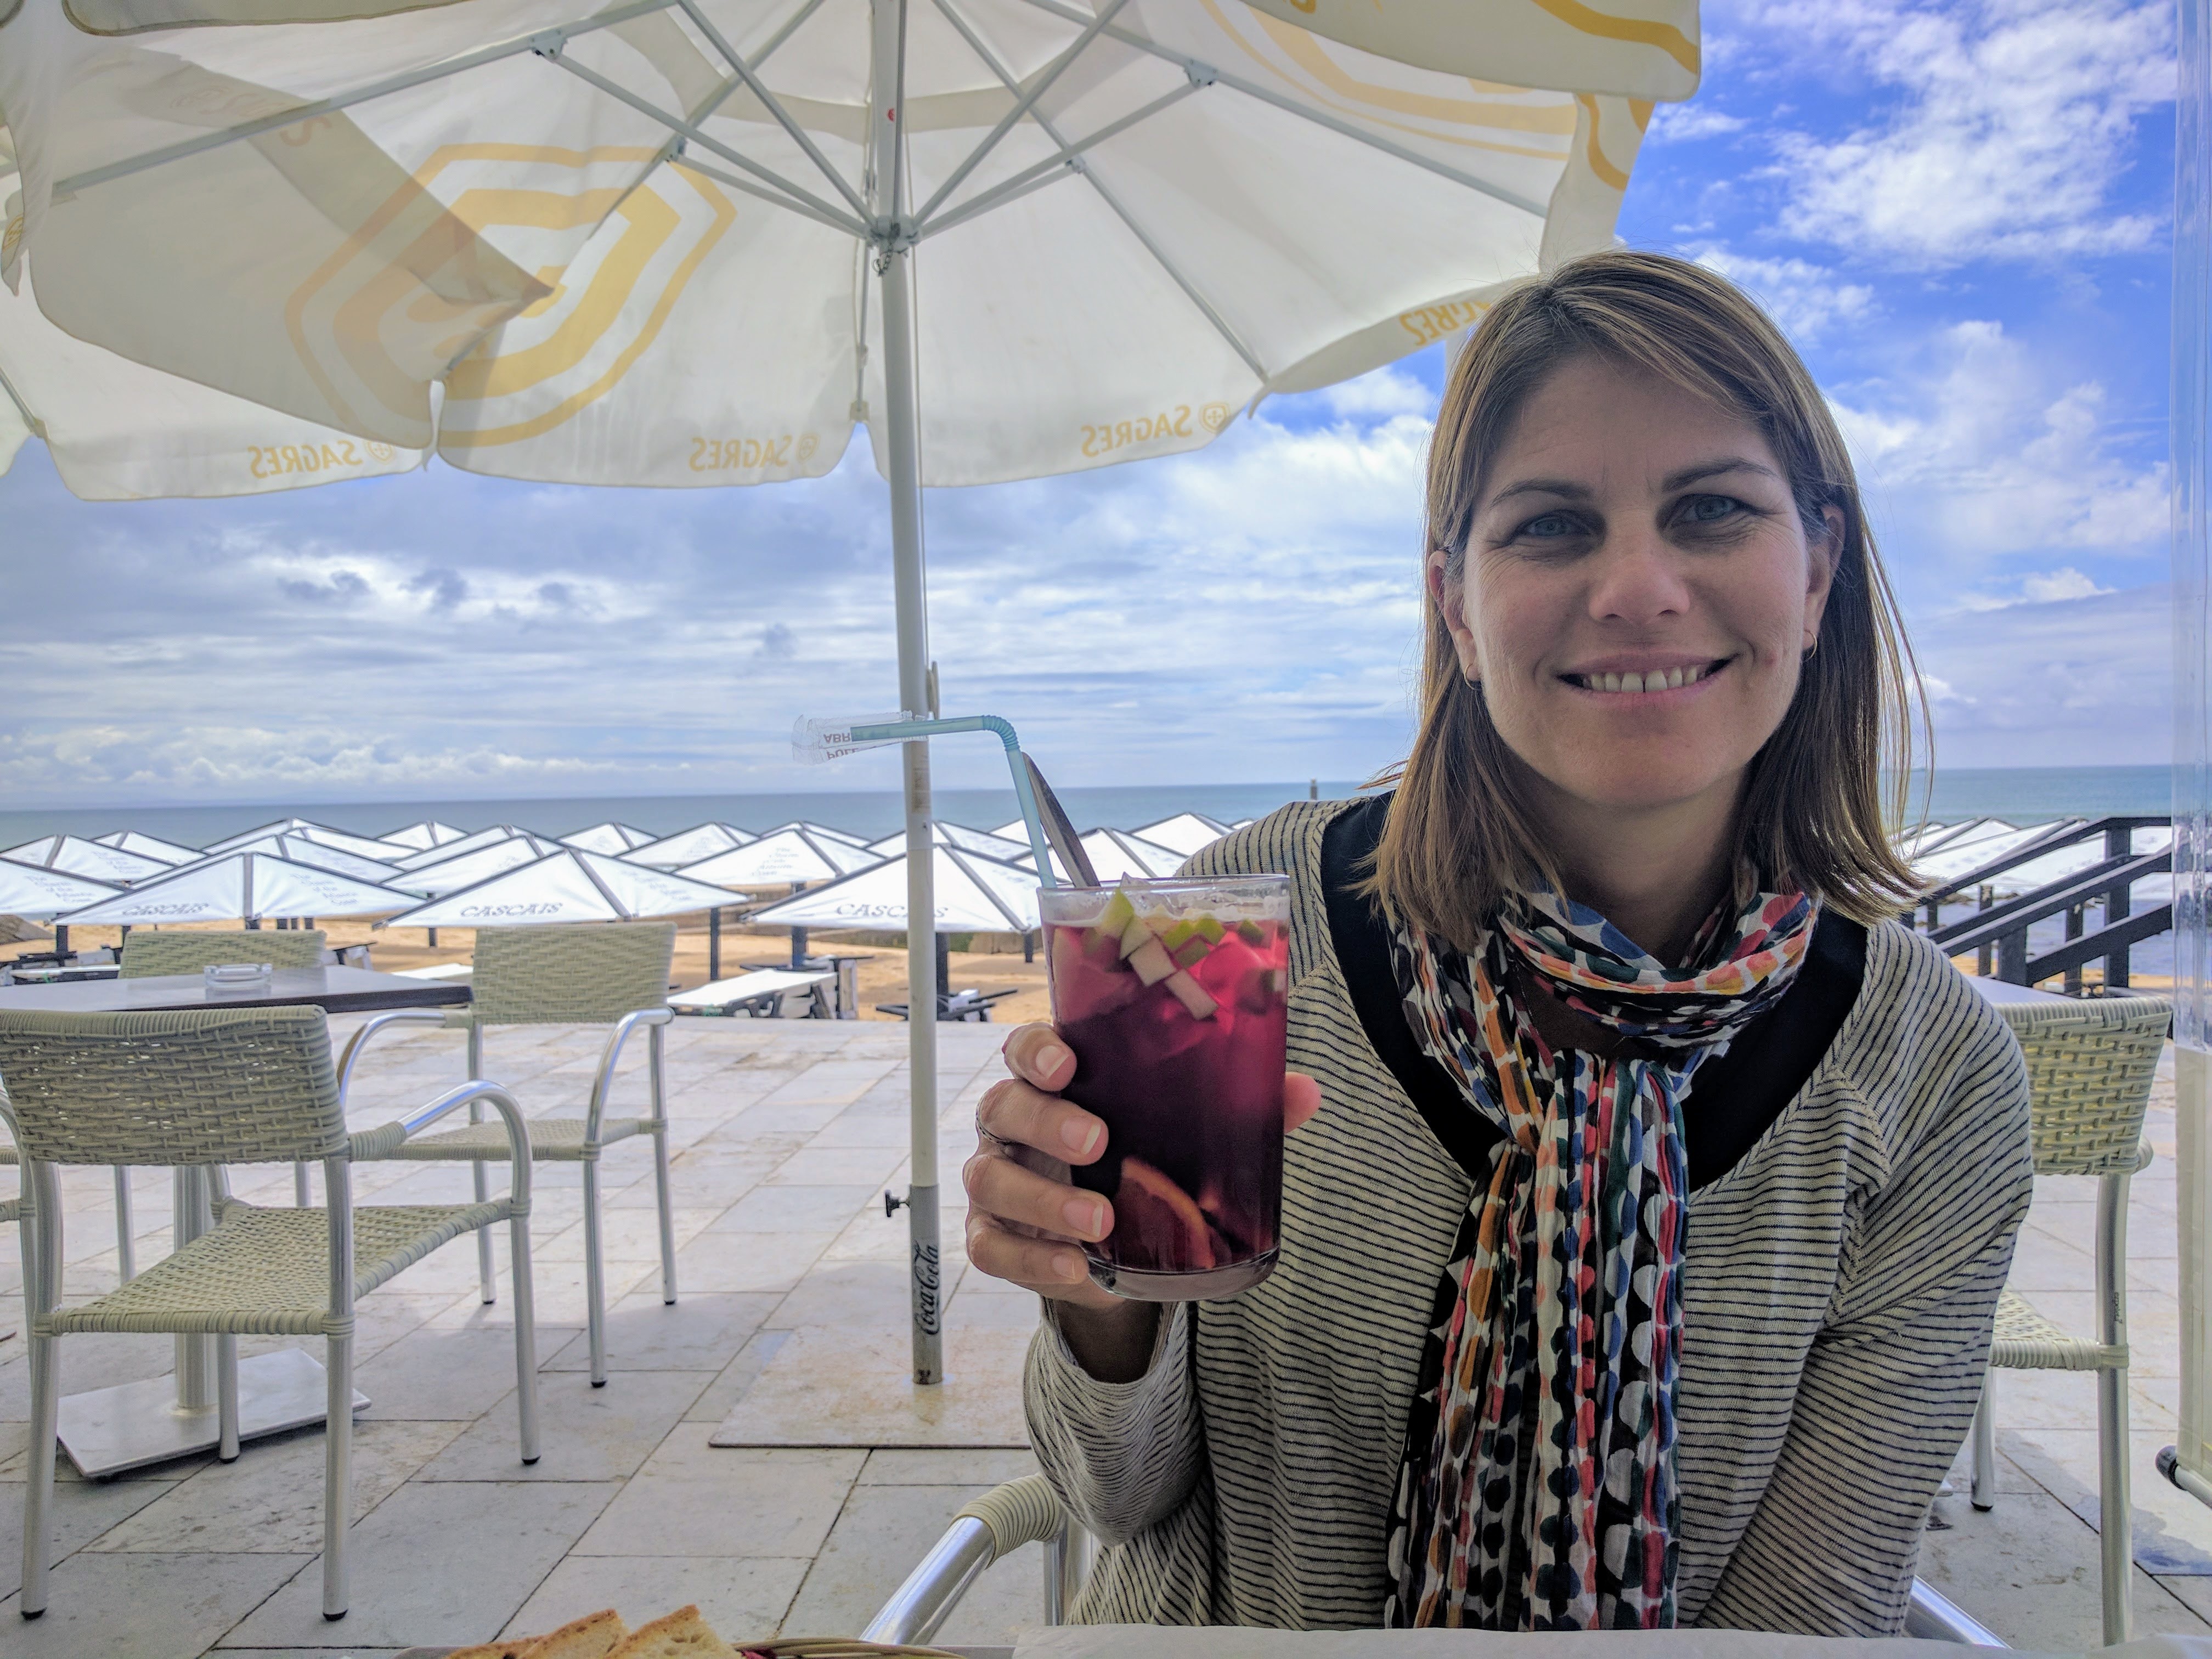 Clare having a Sangria in Portugal